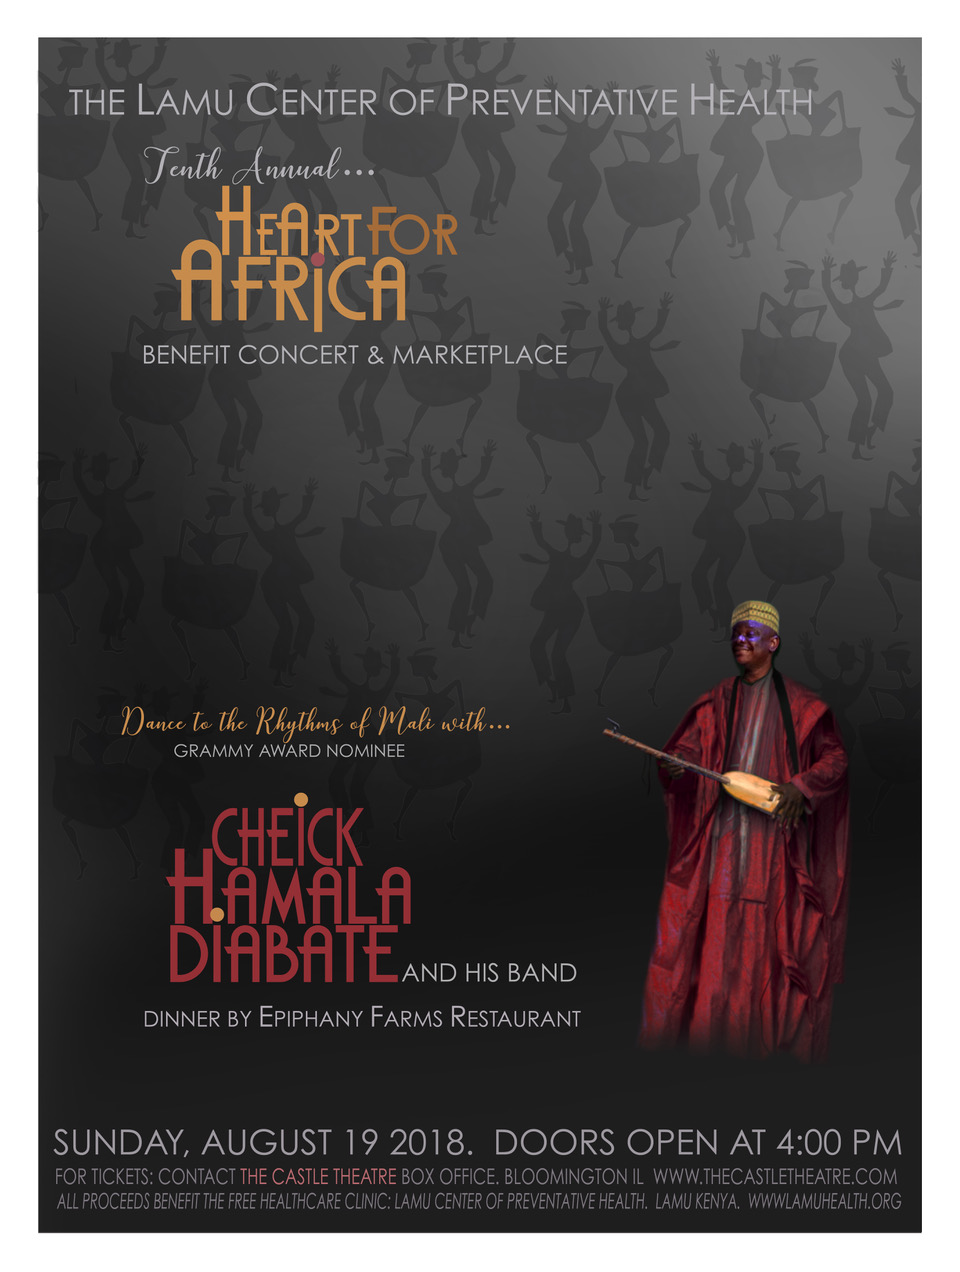 Annual HEART FOR AFRICA Benefit Concert with Cheick Hamala Diabate